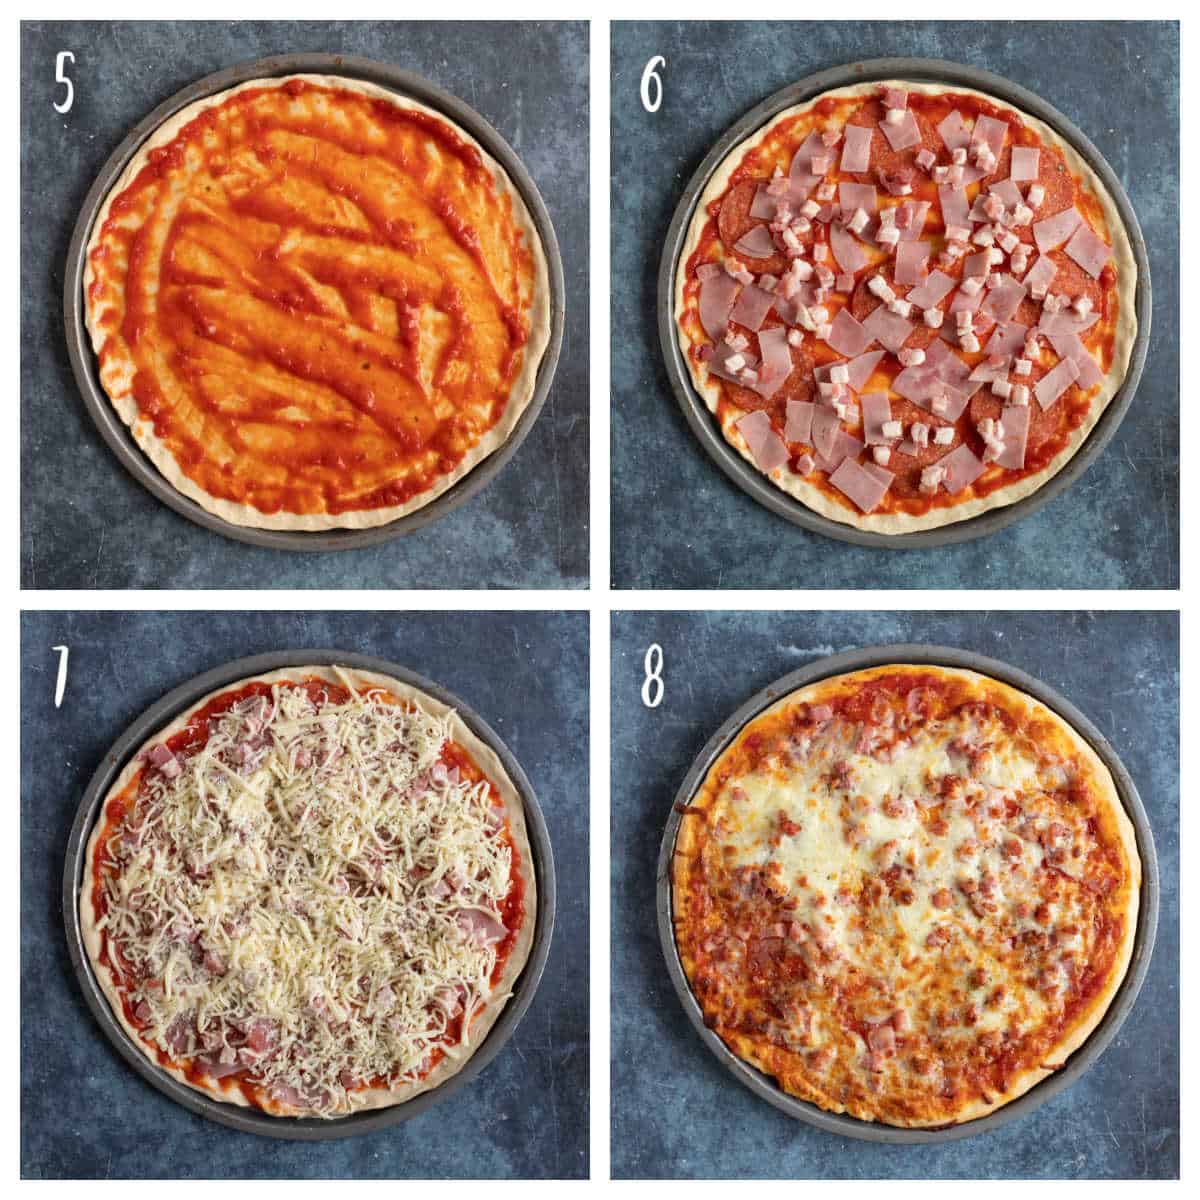 Making meat lovers pizza - step by step photo instructions.